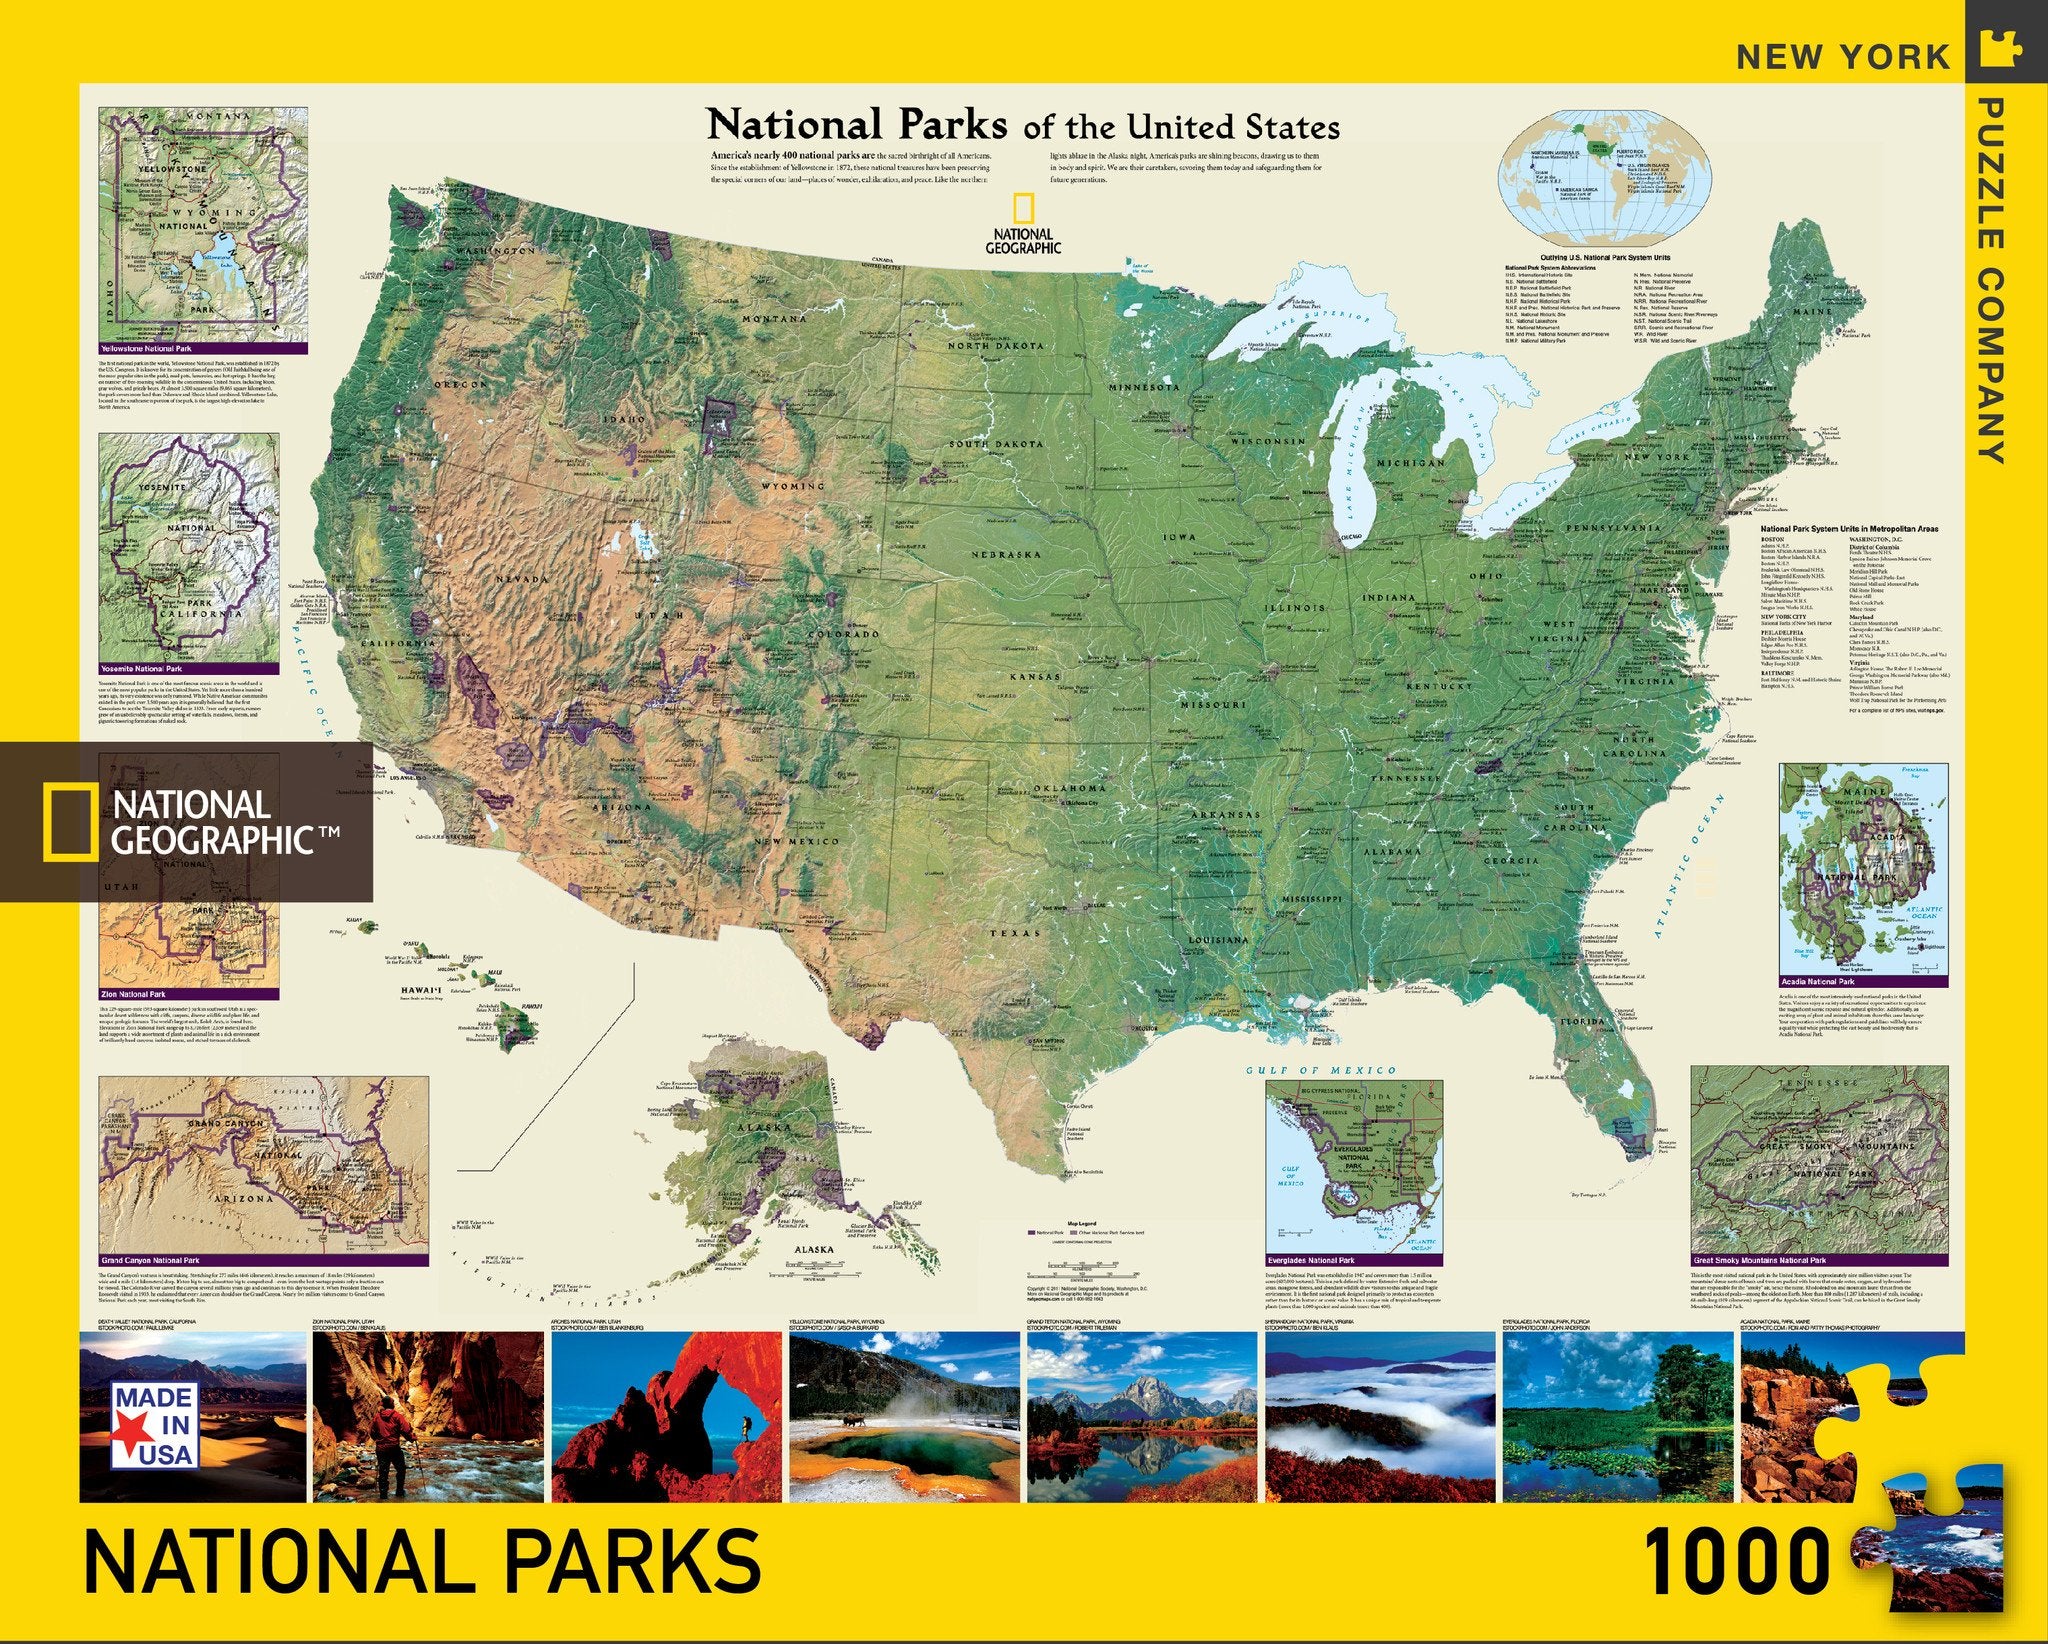 American National Parks (1000 pc puzzle)